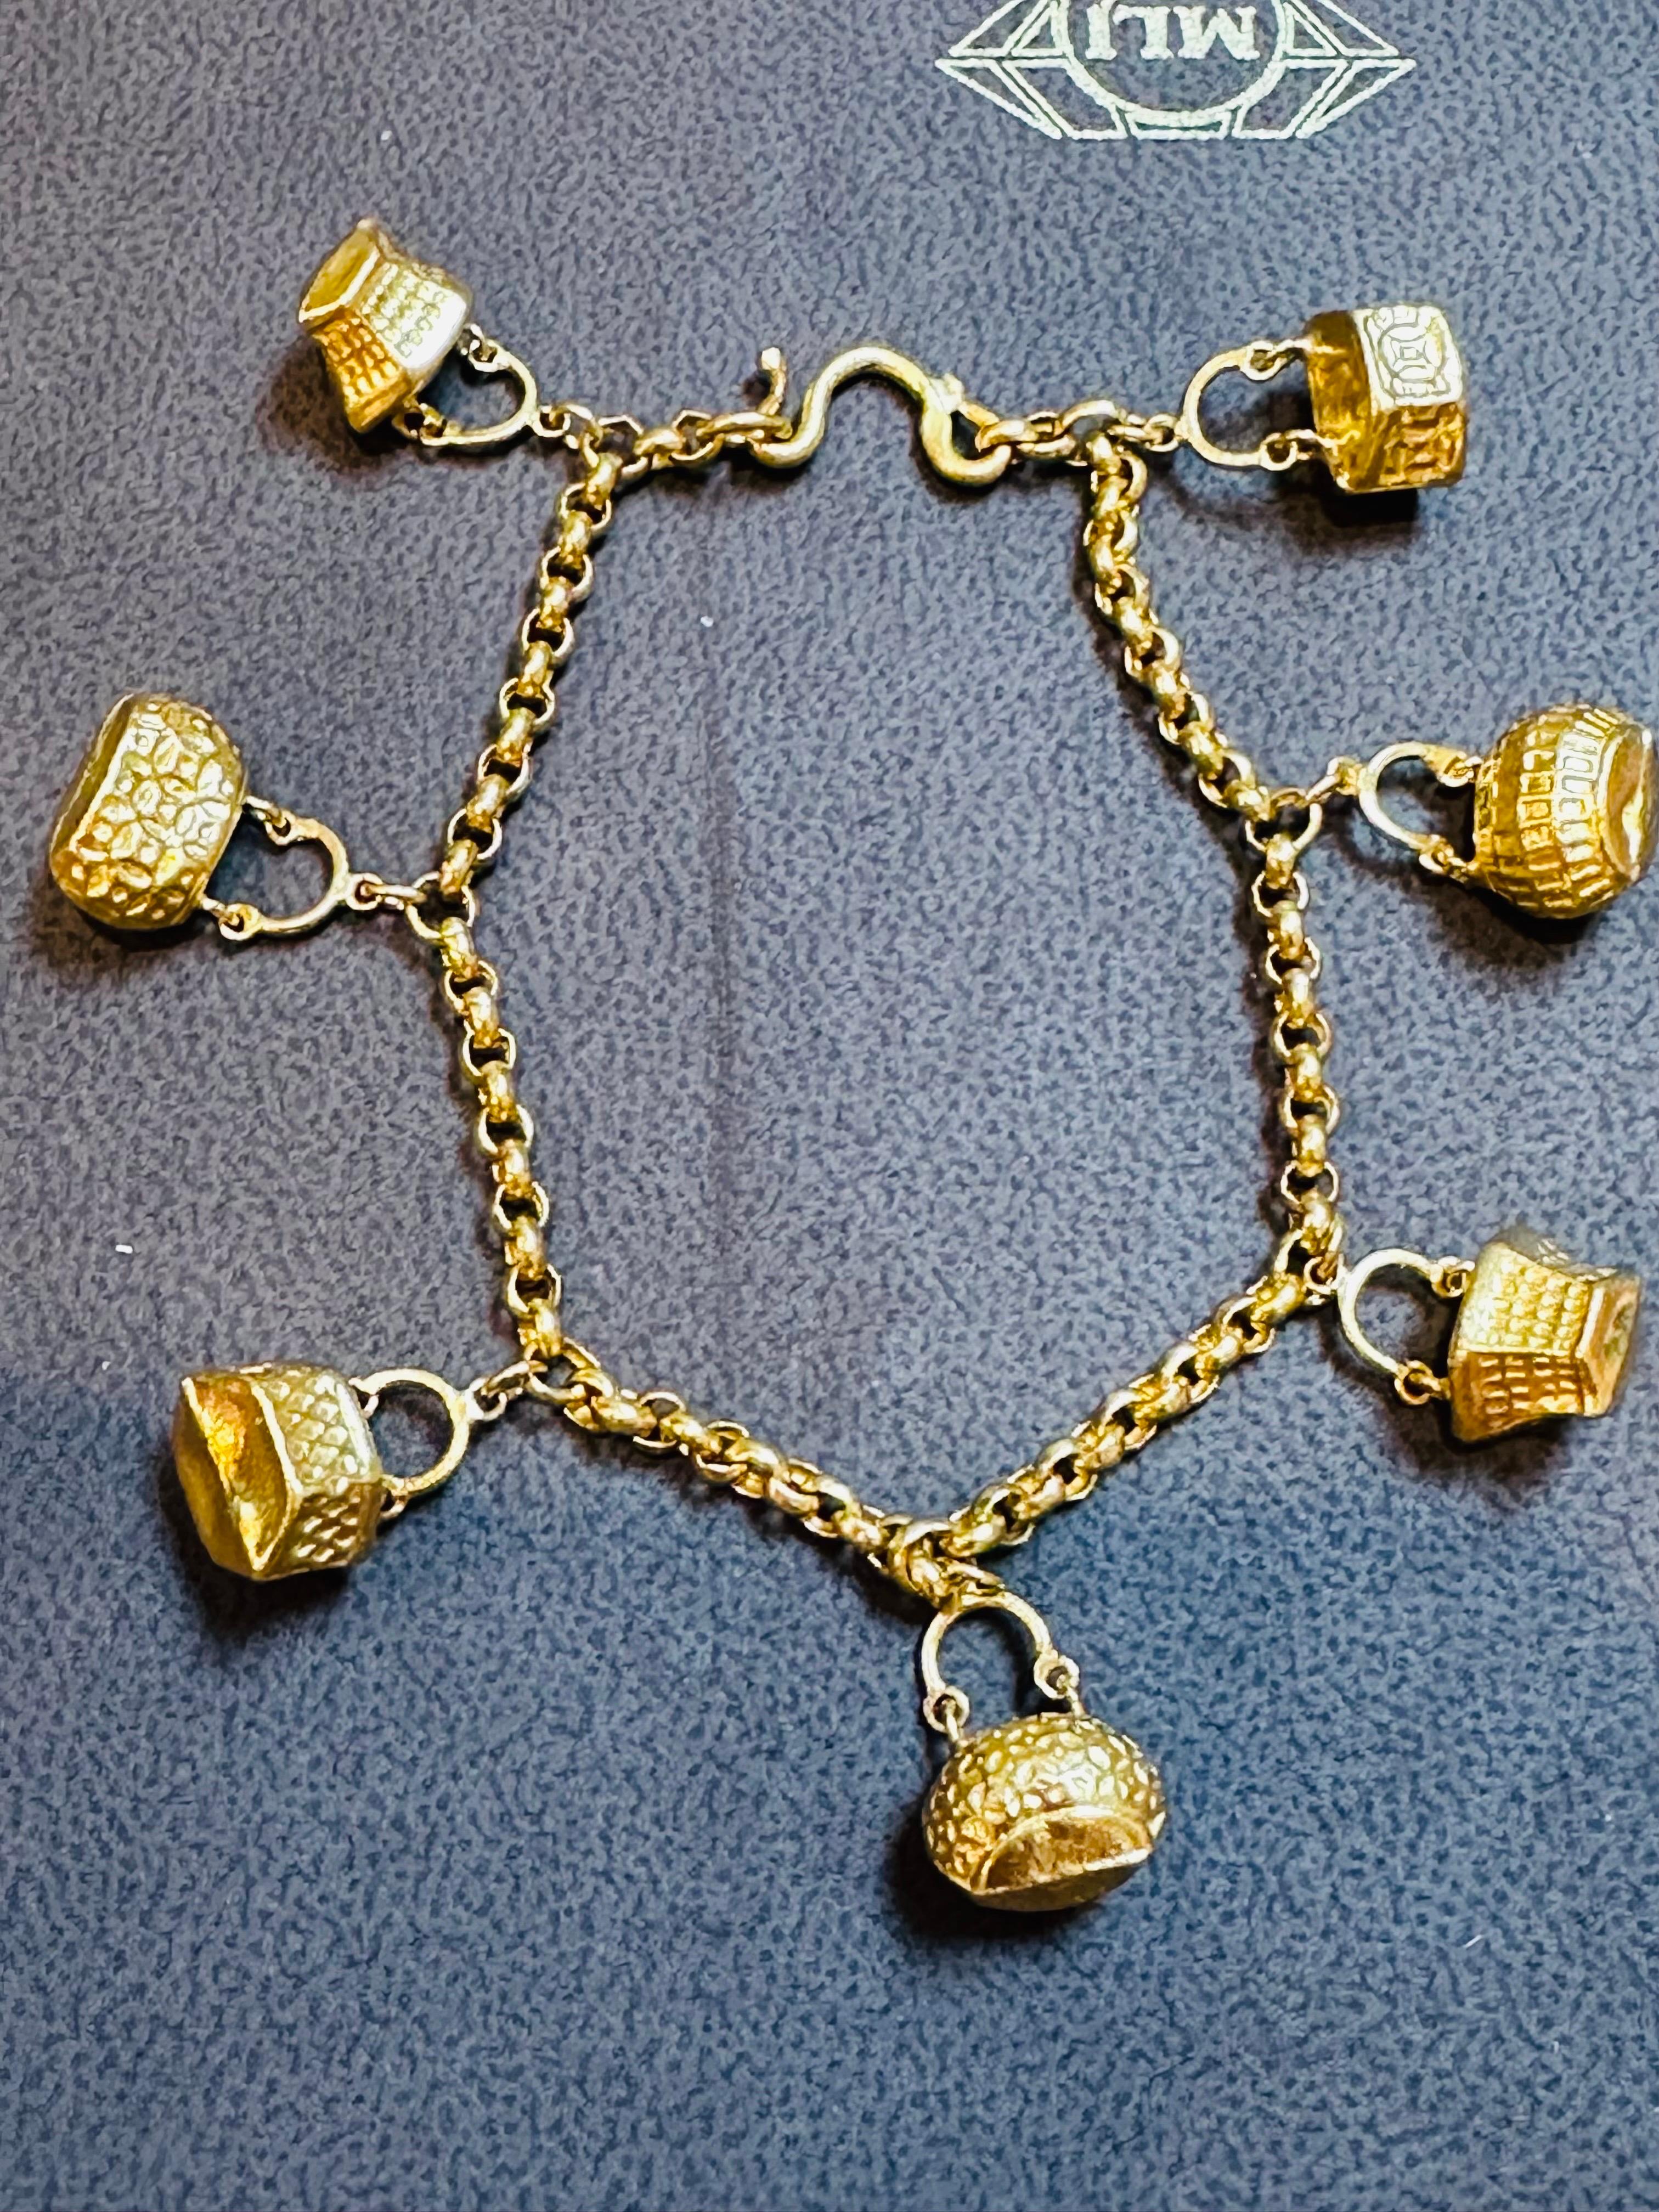 24 Karat Yellow Pure Gold 15.5 Gm Charm Bracelet with 7 Basket Charms In Excellent Condition For Sale In New York, NY